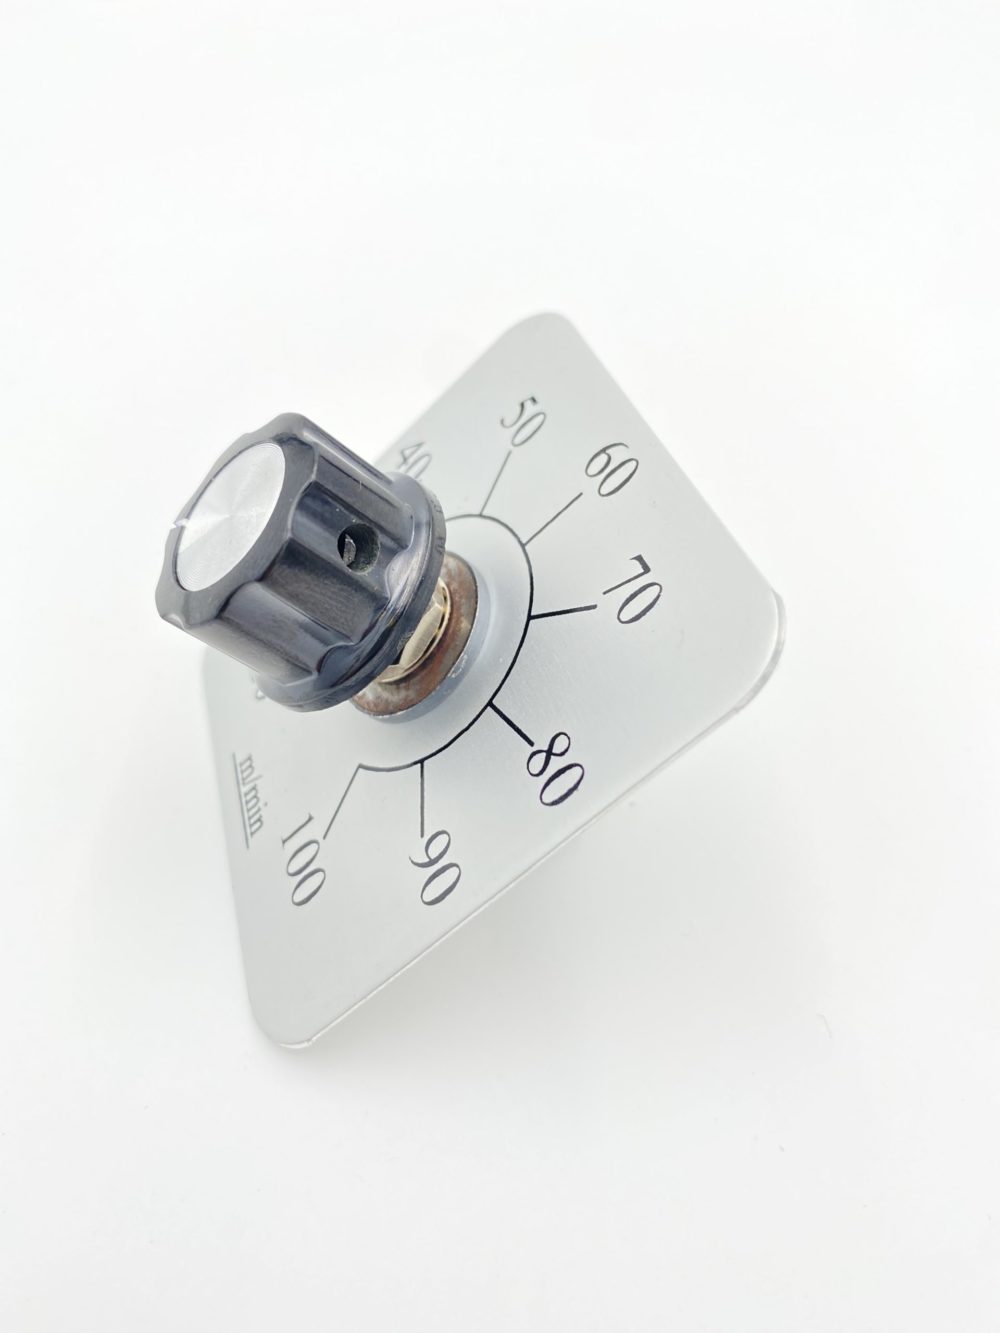 Blade Speed Selector Switch For RMT Bandsaws - RMTPE0117